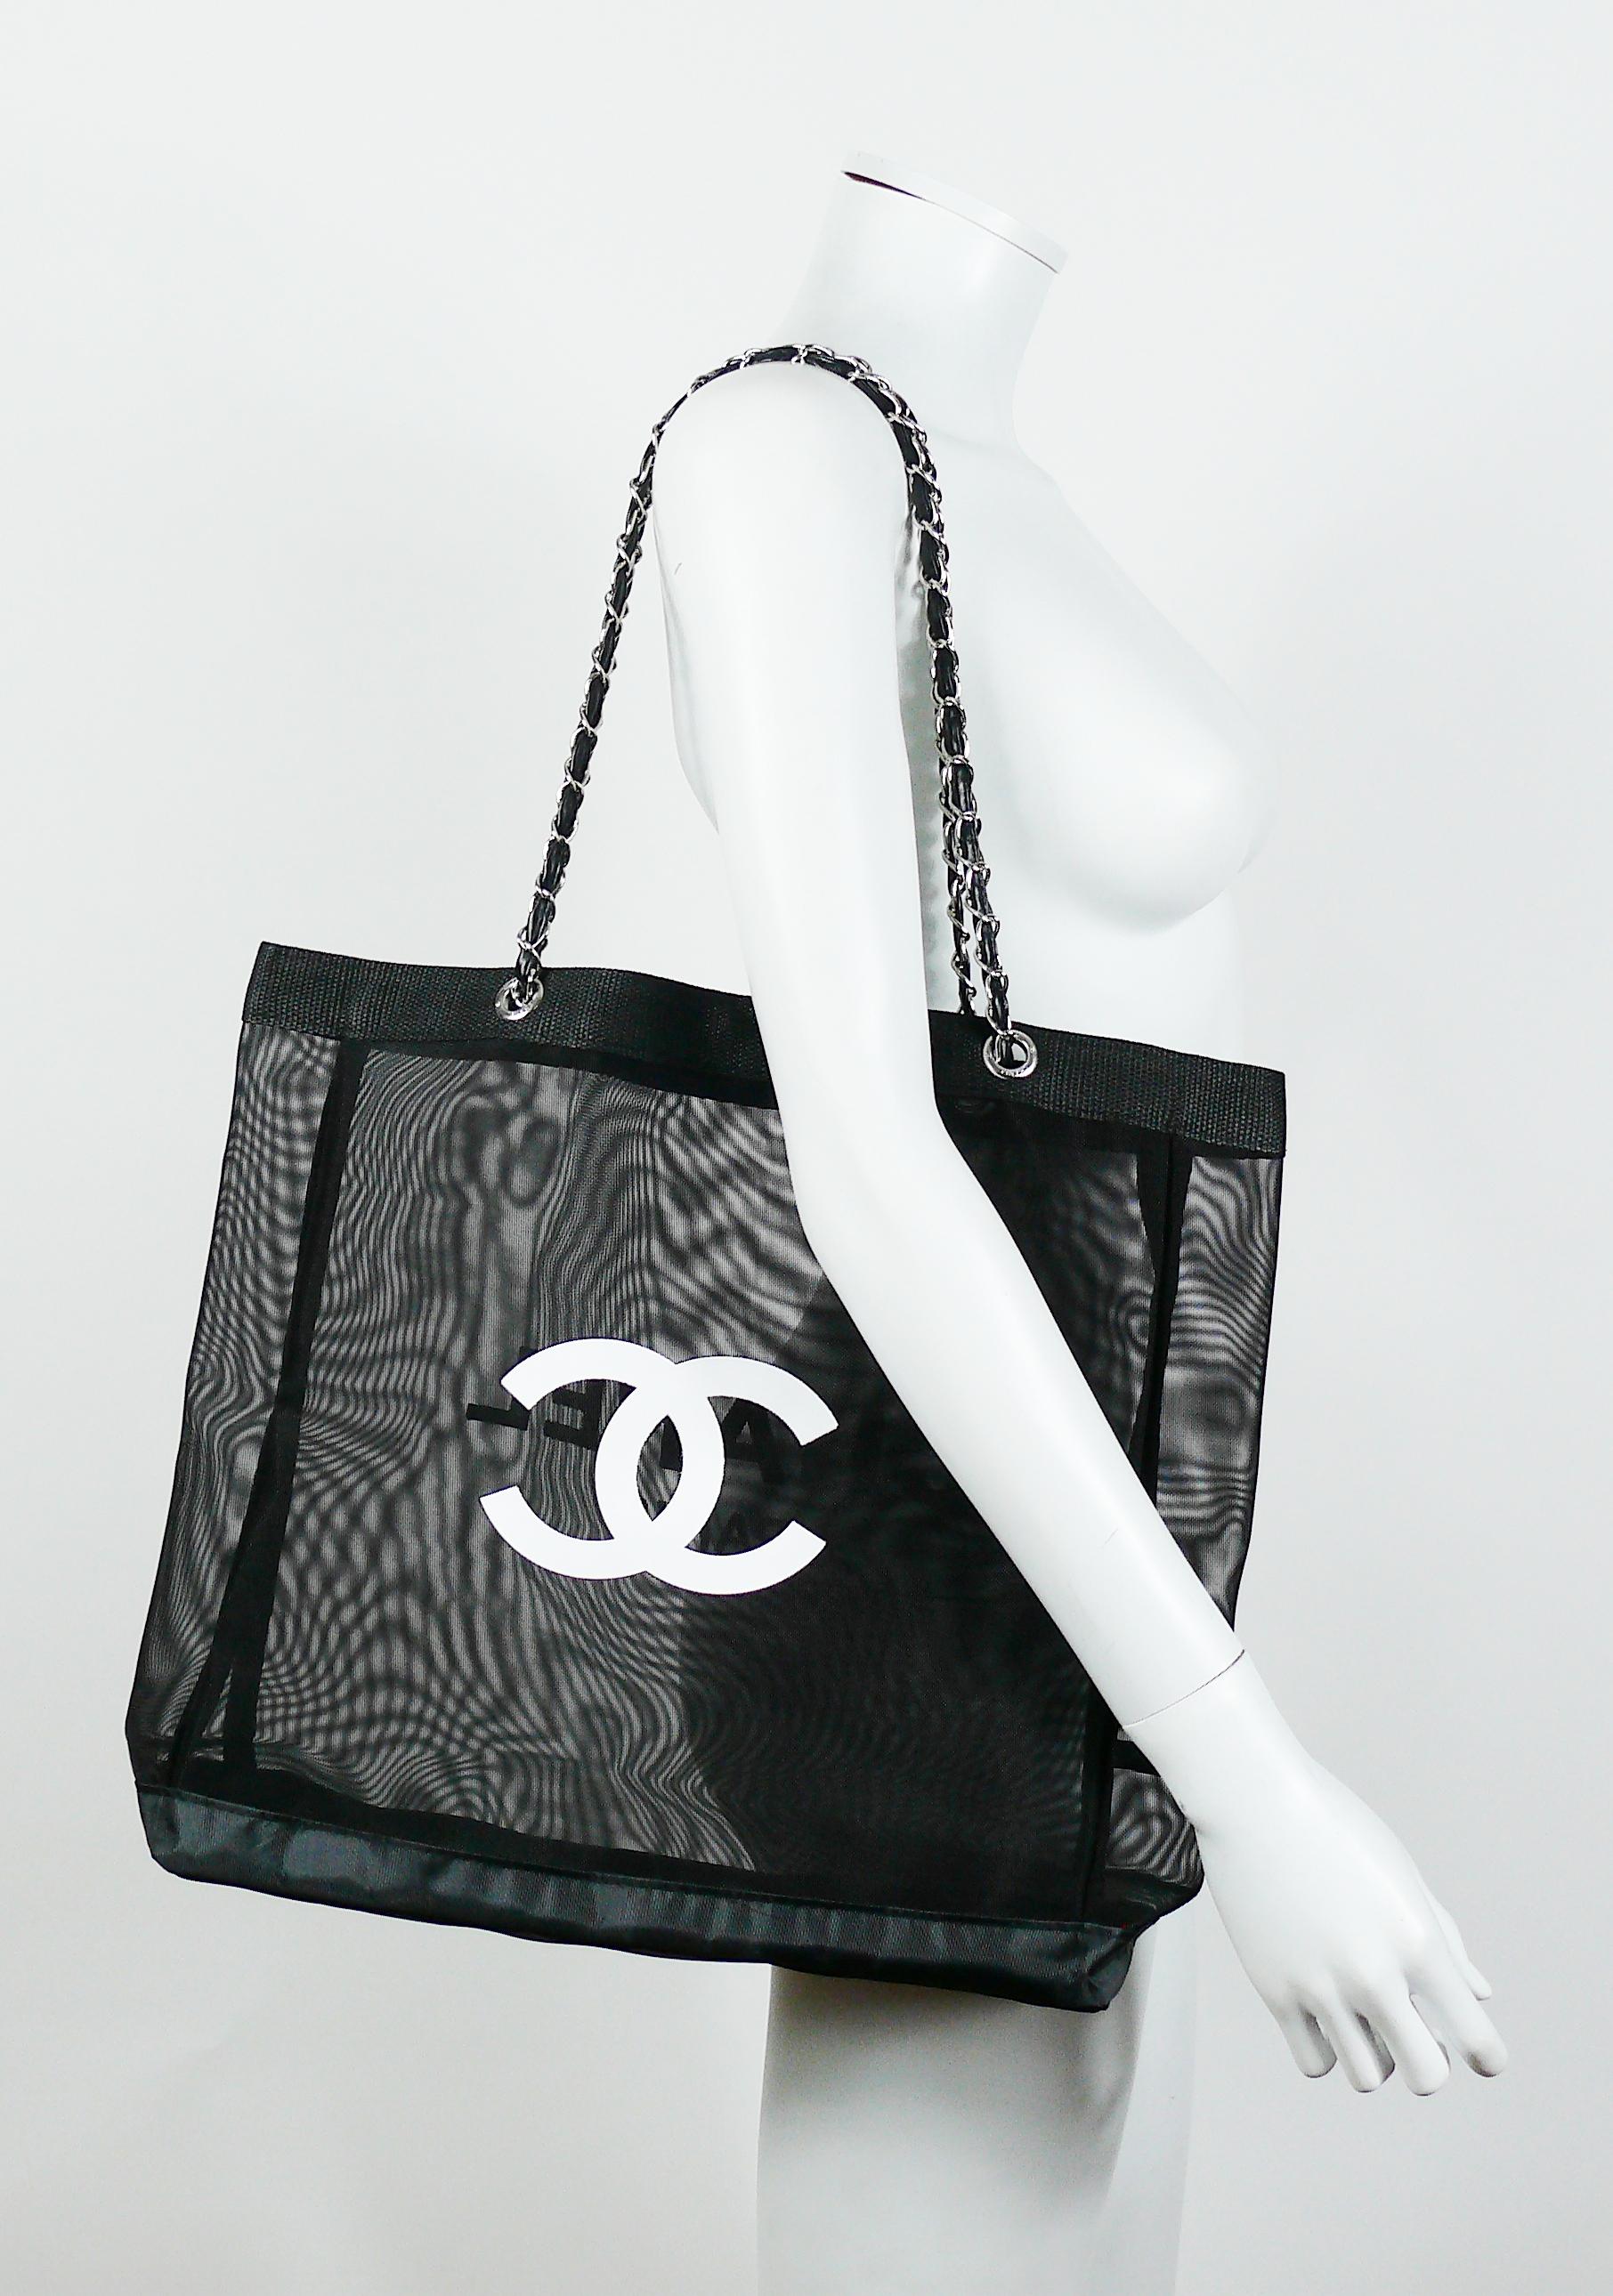 CHANEL black mesh tote shopping promotional gift bag.

This bag features :
- Black mesh body with black nylon base and top trim.
- White flocked Chanel Paris on one side and CC logo on the other.
- Silver toned chains with intertwined black faux